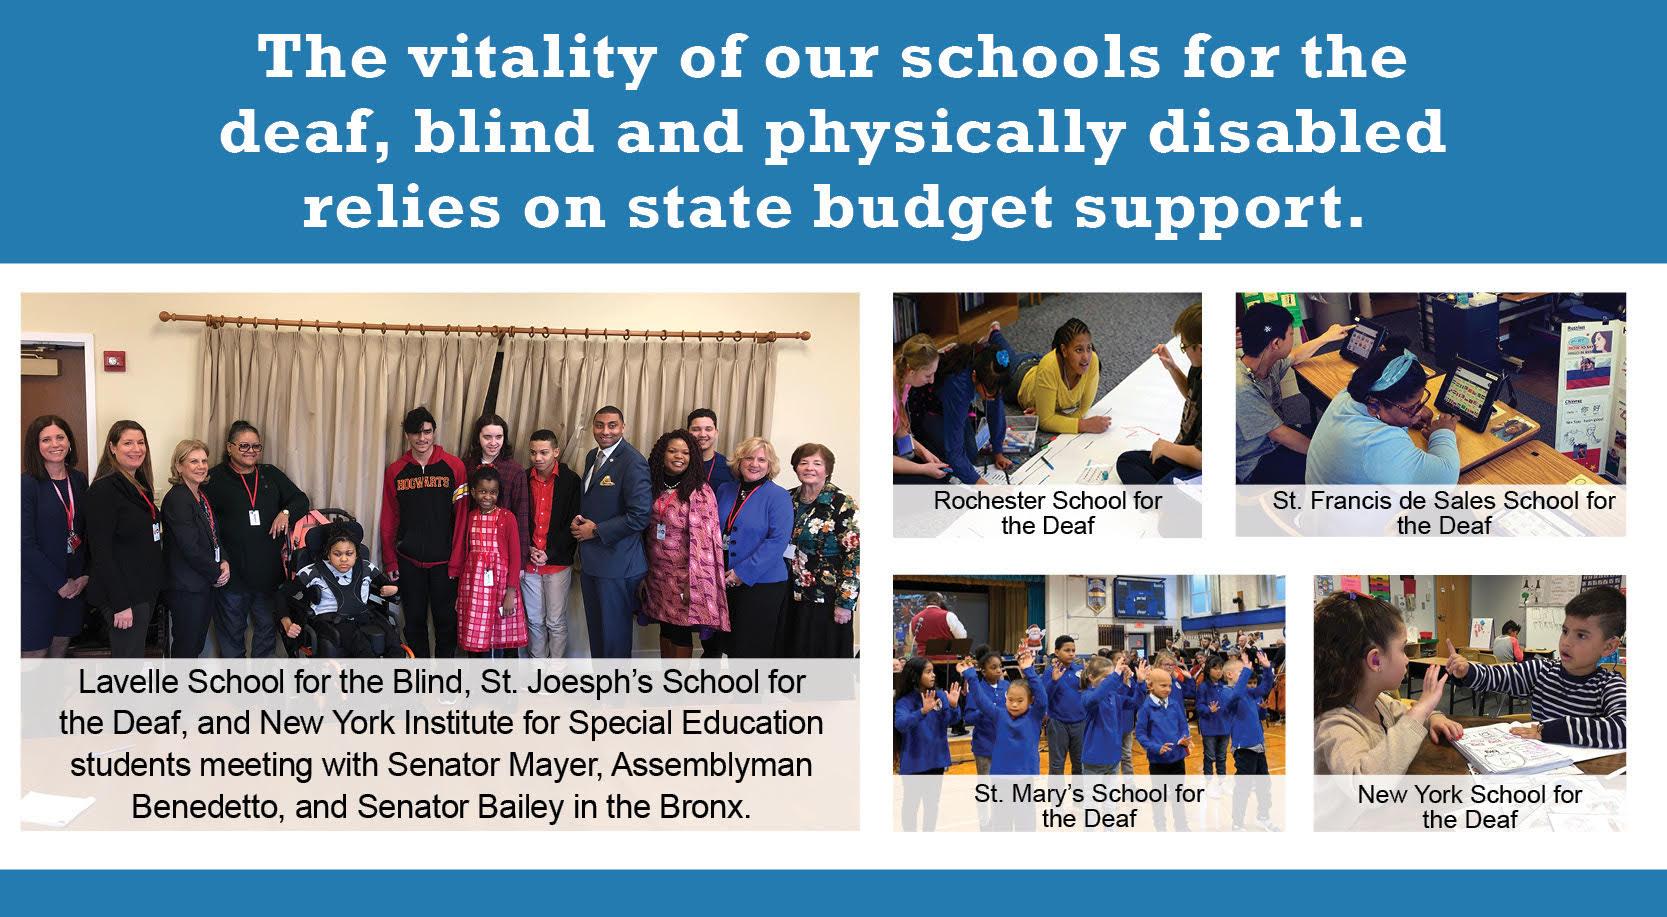 4201 Association: The vitality of our schools for the deaf, blind and physically disabled relies on state budget support.